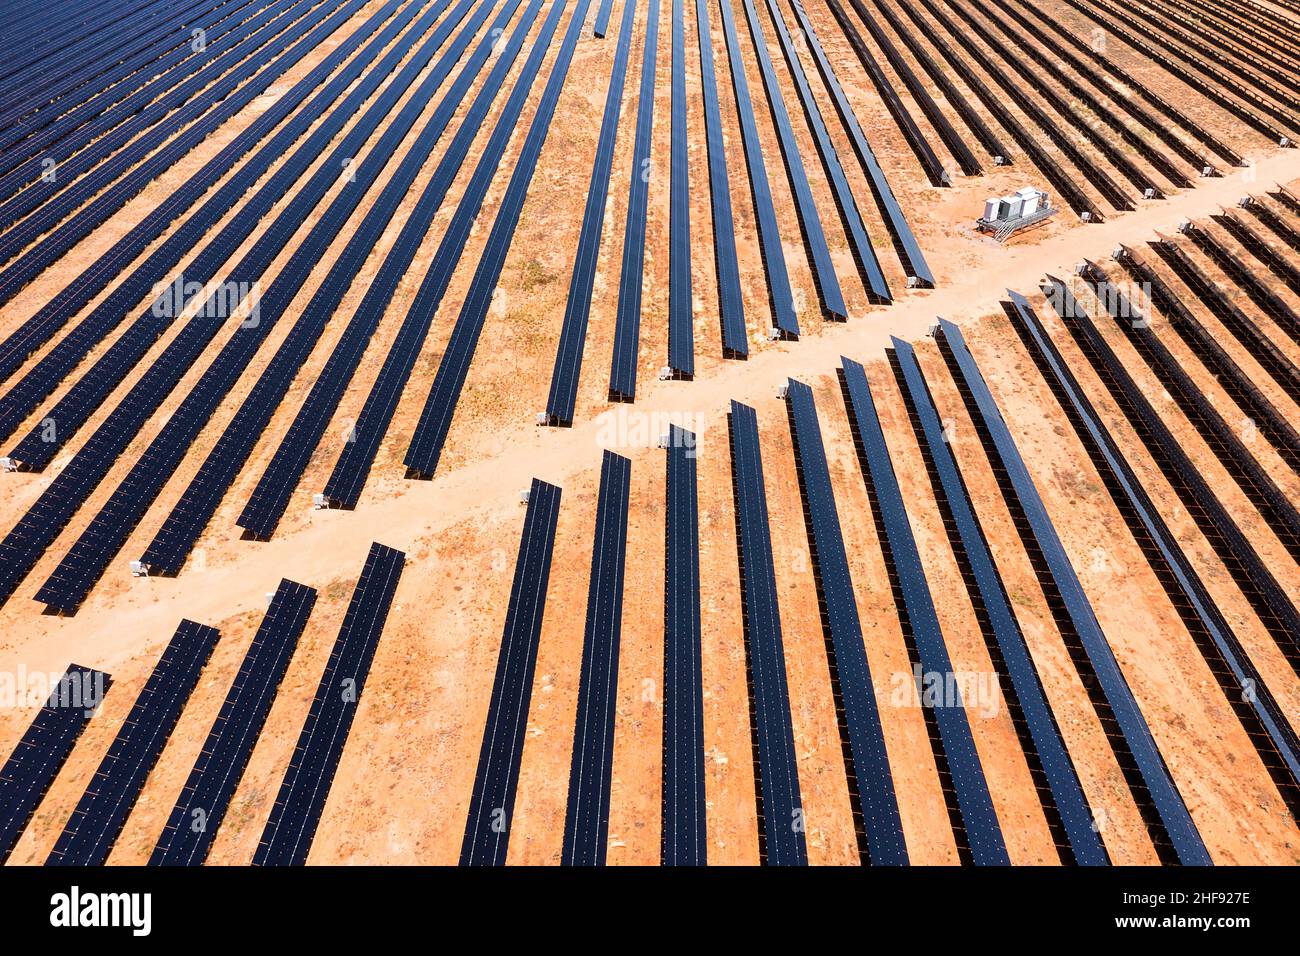 Endless lines of sola panels in renewable sola power plant in outback near Broken Hill of Australia. Stock Photo